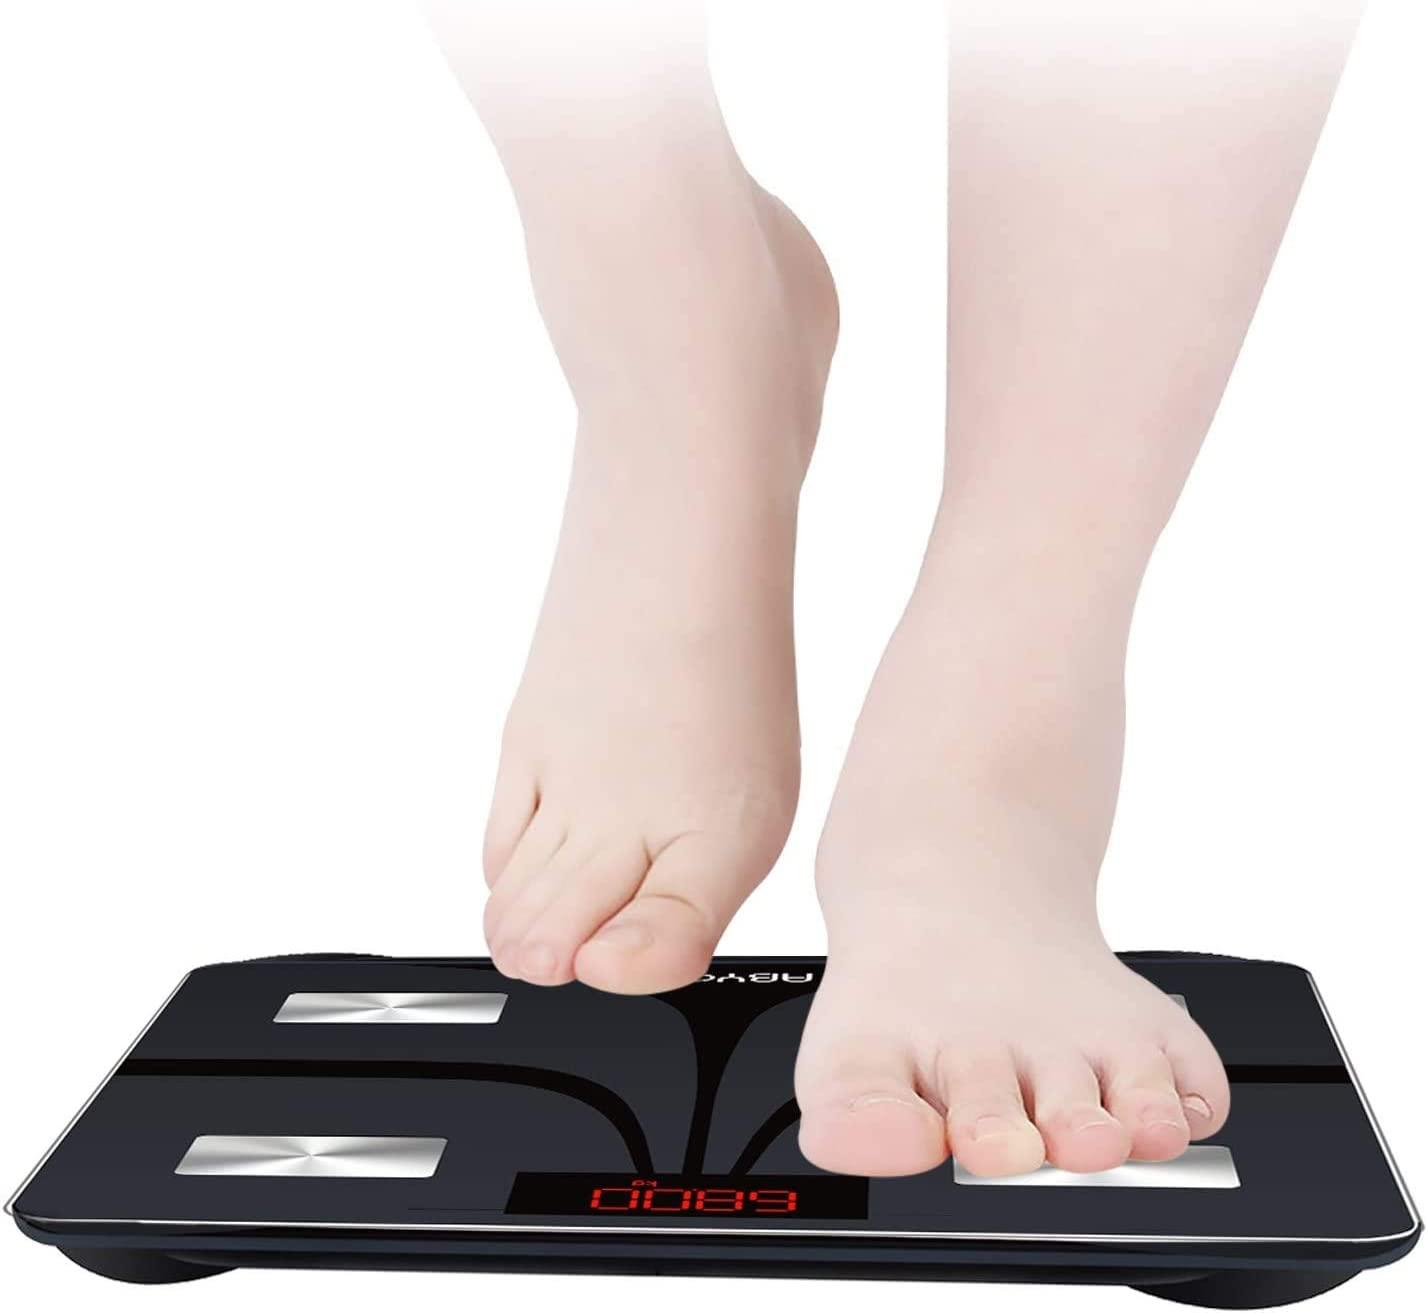 Digital Body Weight Bathroom Scale, Weight Scales with Step-On Technology,  LCD Backlit Display, Smart Weighing Scale, Weight Loss Monitor Fitness